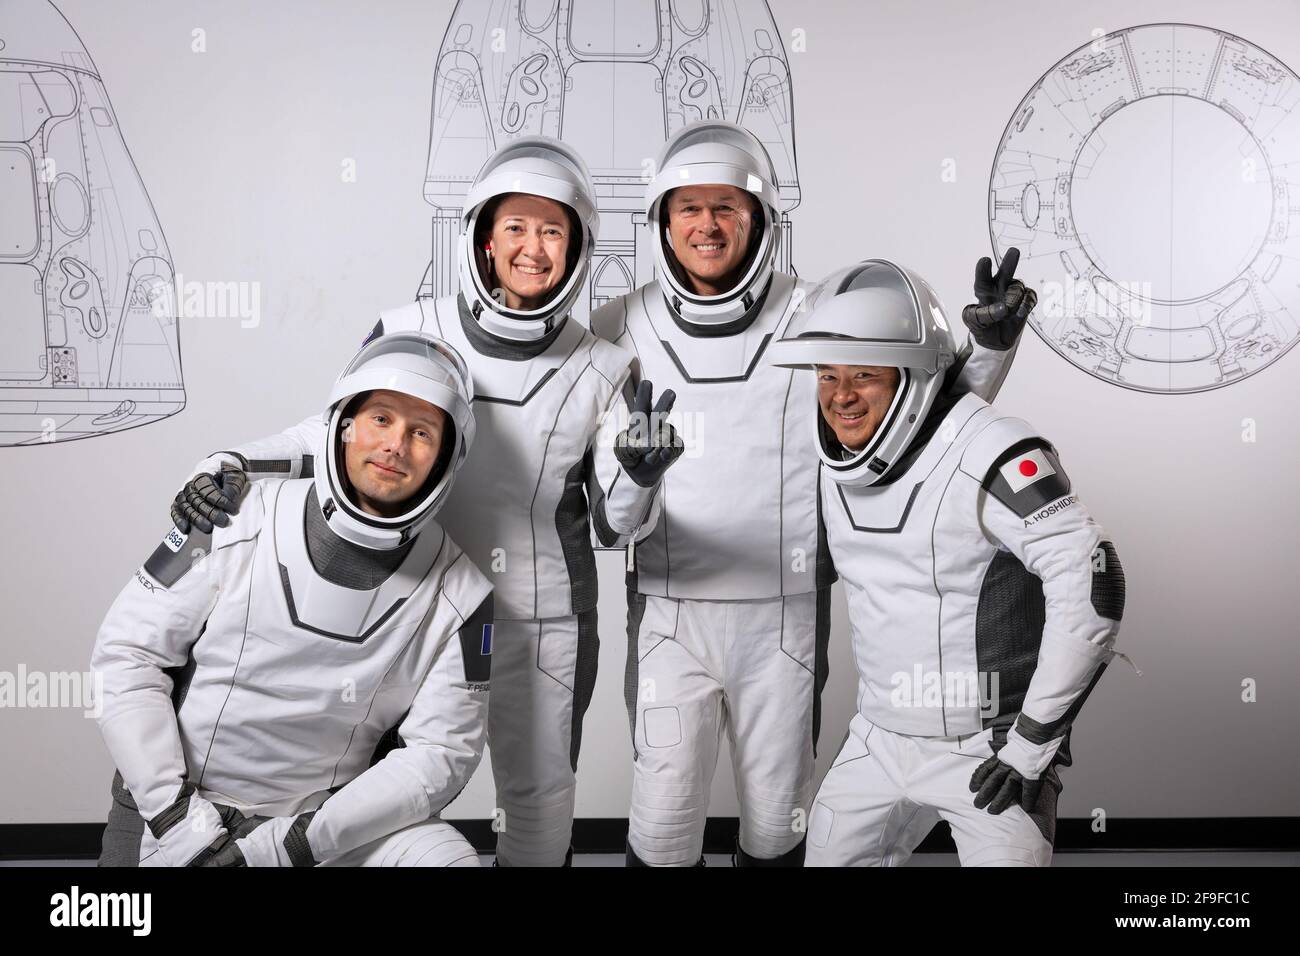 Kennedy Space Center in Florida, USA. 18th April, 2021. Hawthorne, United States. 18th Apr, 2021. The crew for the second long-duration SpaceX Crew Dragon mission to the International Space Station, NASA's SpaceX Crew-2, are pictured during a training session at the SpaceX training facility in Hawthorne, California. From left are, Mission Specialist Thomas Pesquet of the ESA (European Space Agency); Pilot Megan McArthur of NASA; Commander Shane Kimbrough of NASA; and Mission Specialist Akihiko Hoshide of the Japan Aerospace Exploration Agency. Credit: UPI/Alamy Live News Stock Photo